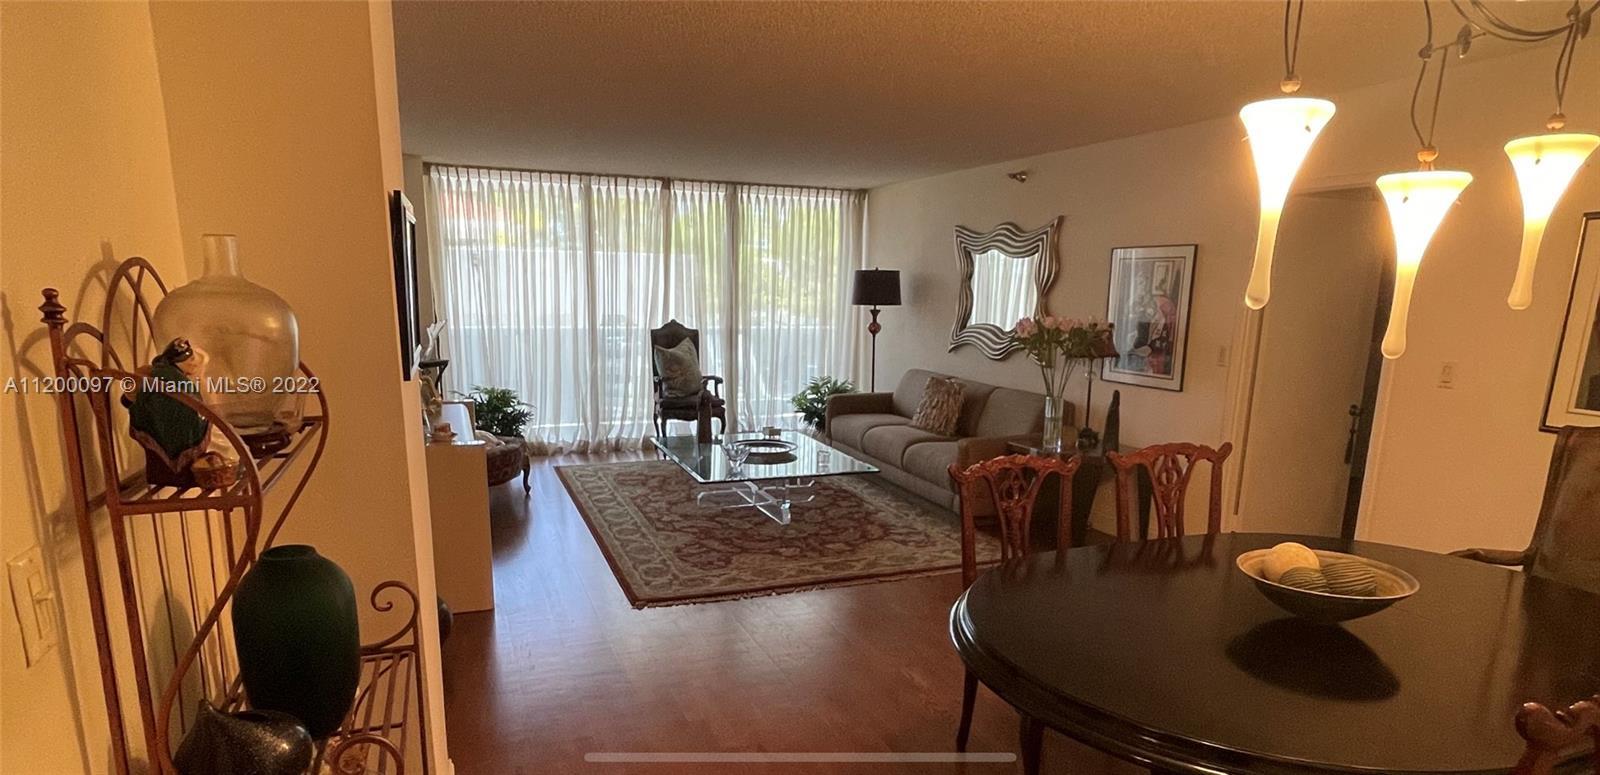 Beautiful 2 bedroom/2 bathroom condo with real wood floors in the heart of Aventura on "the circle."